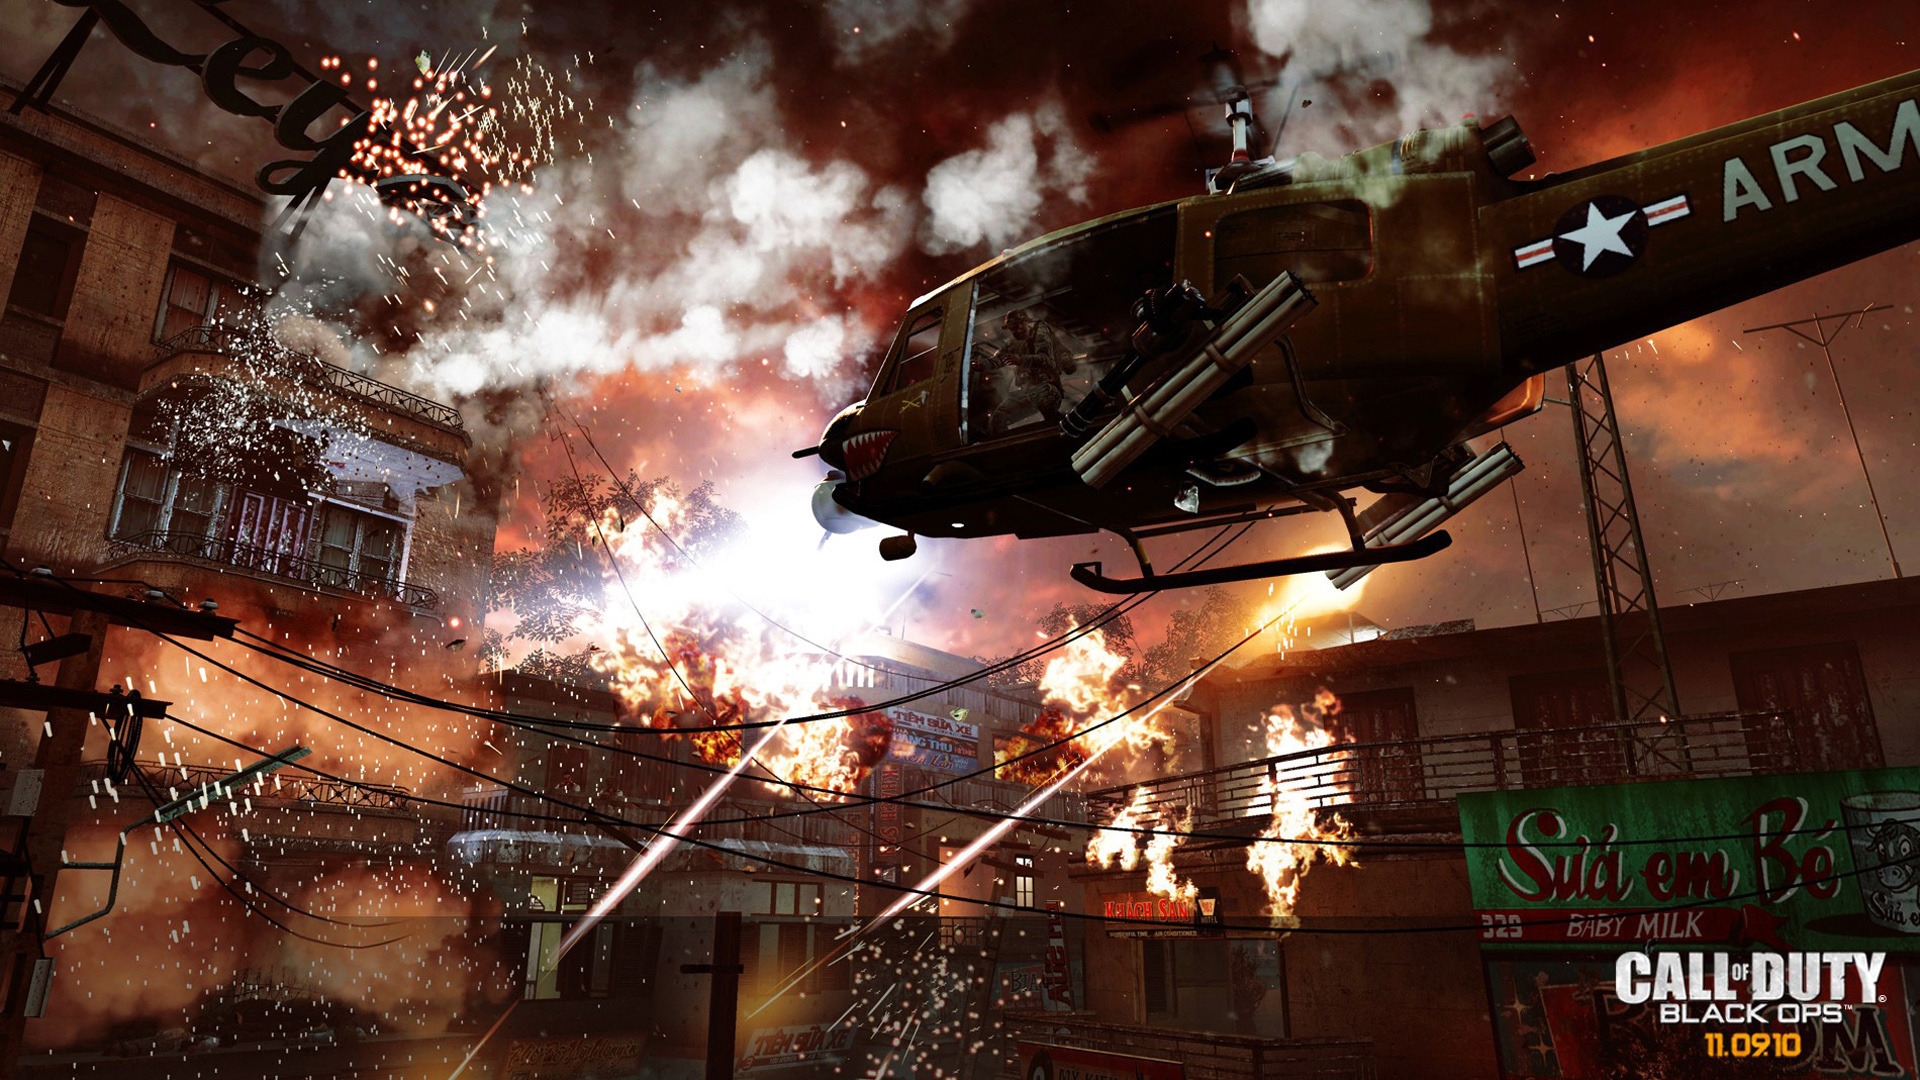 Call of Duty Black Ops Air Support for 1920 x 1080 HDTV 1080p resolution